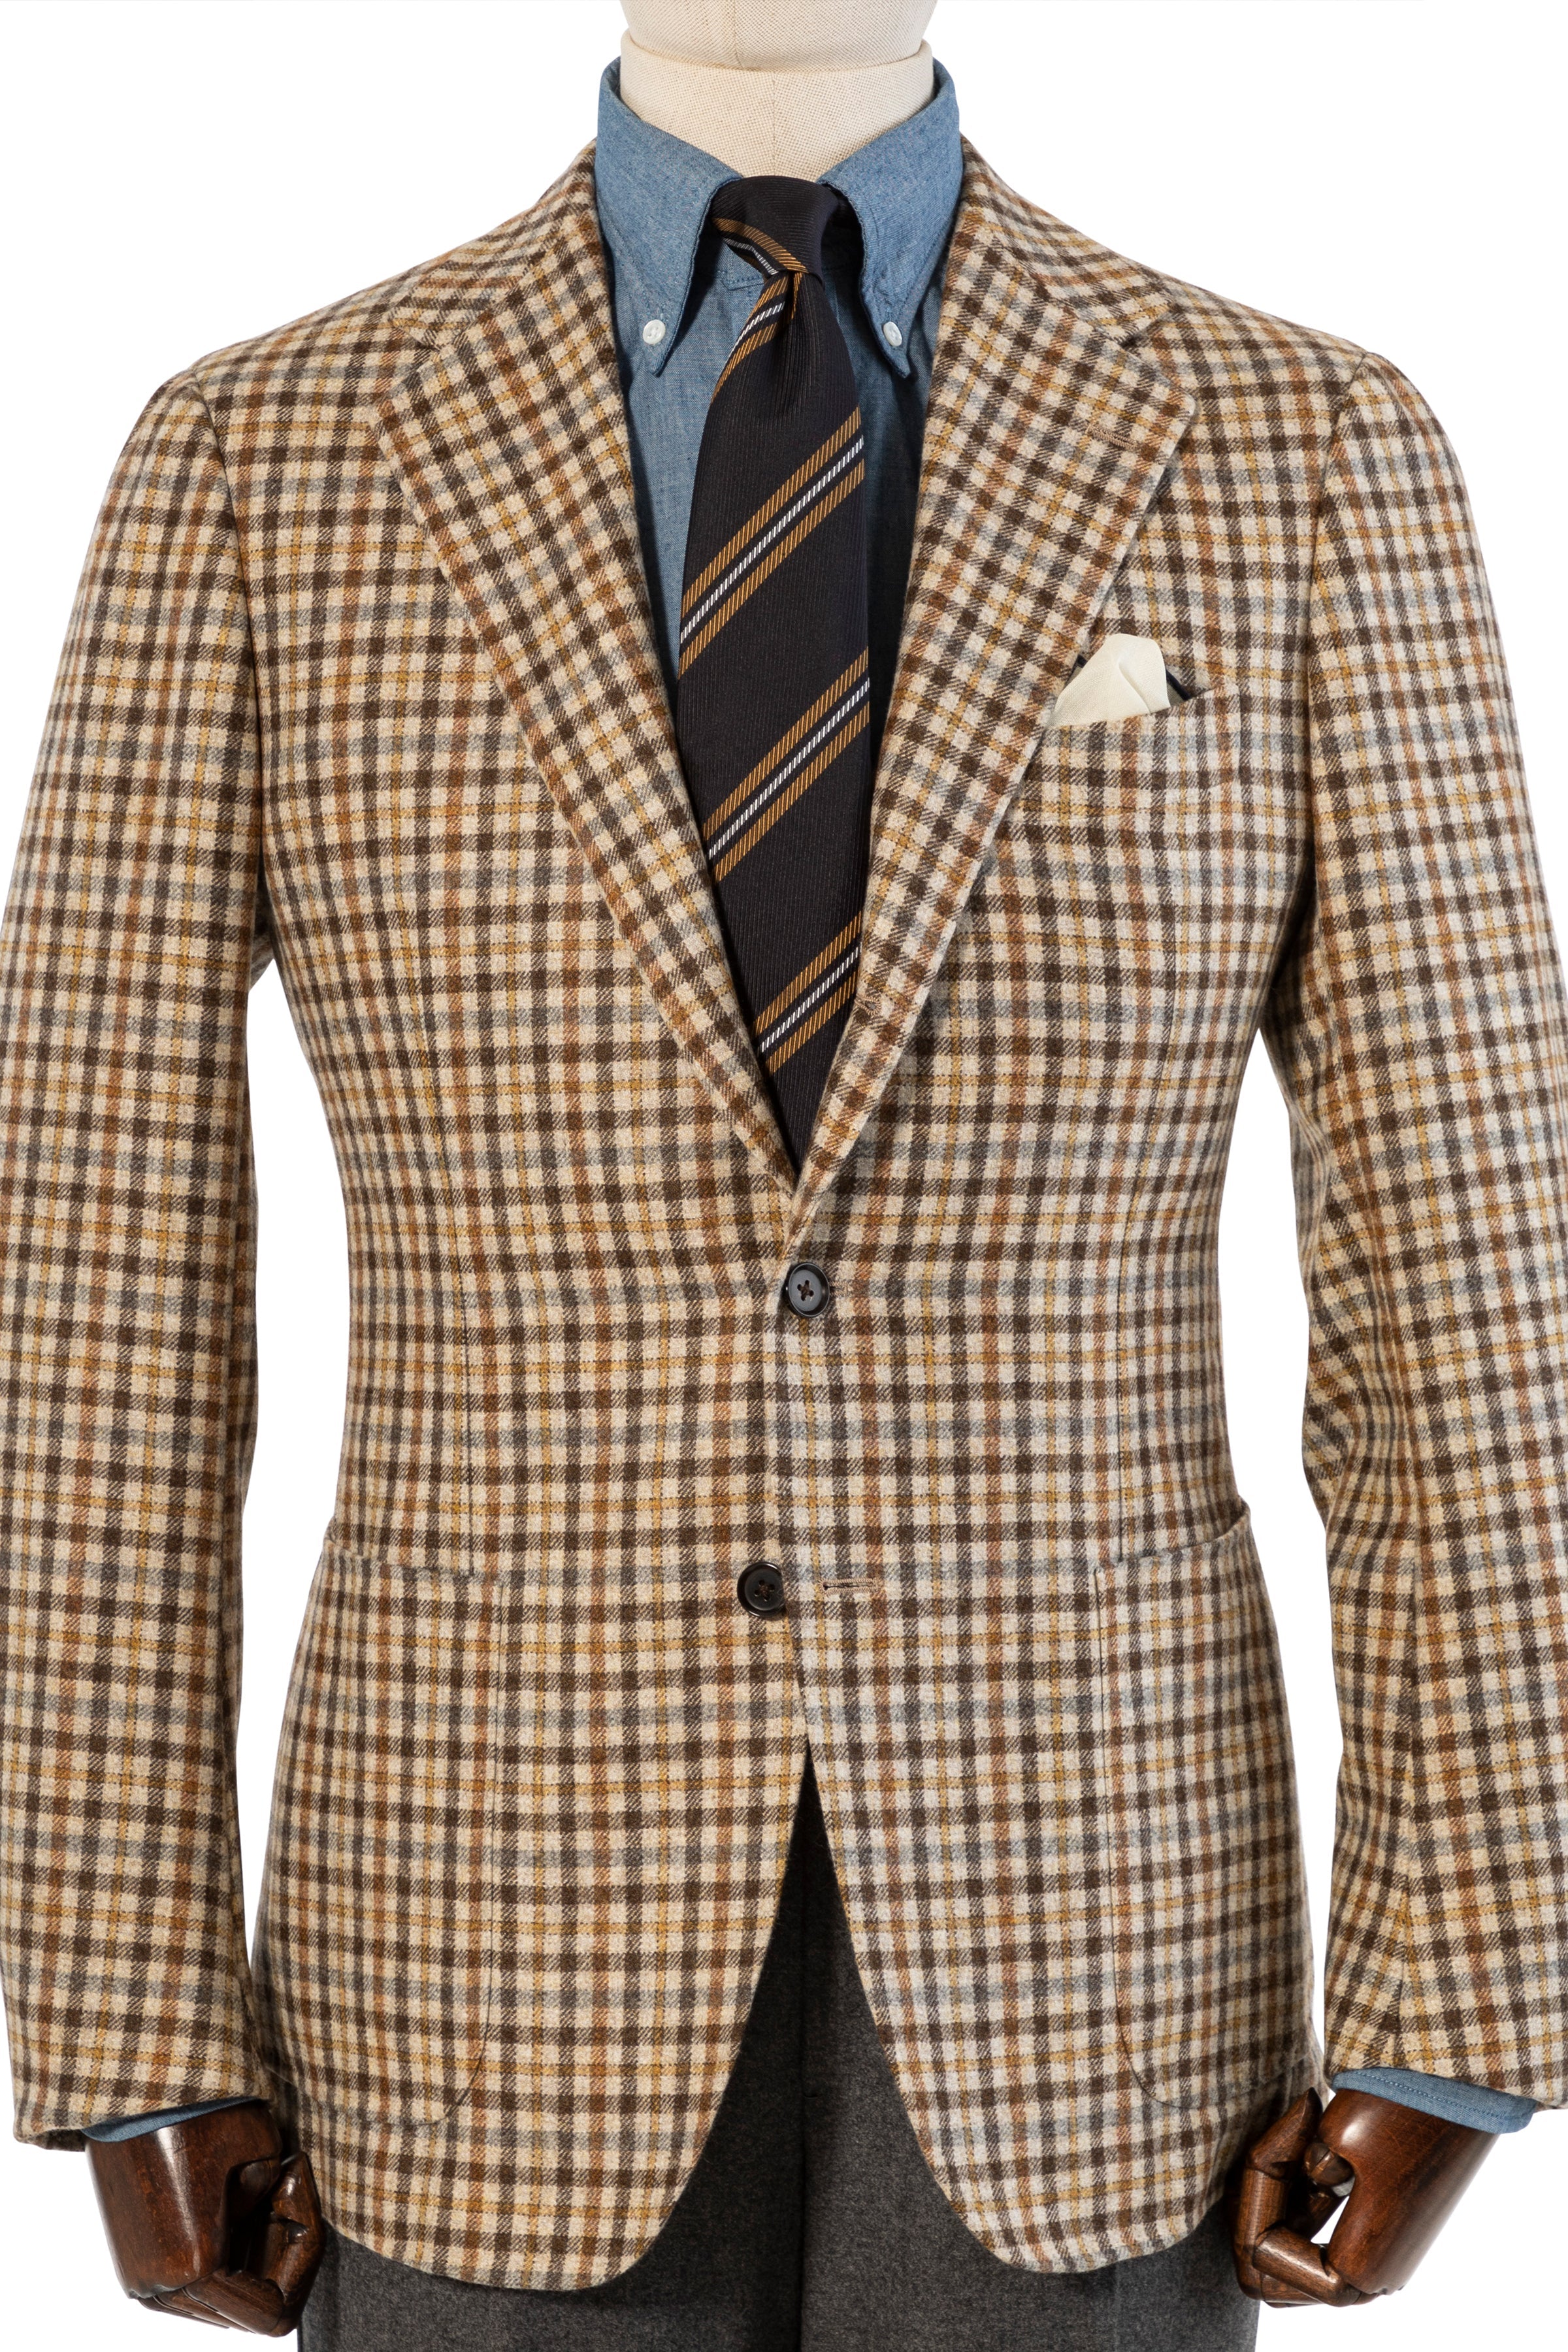 The Armoury by Ring Jacket Model 3 Brown Beige Loro Piana Wool-Mohair-Silk Check Sport Coat